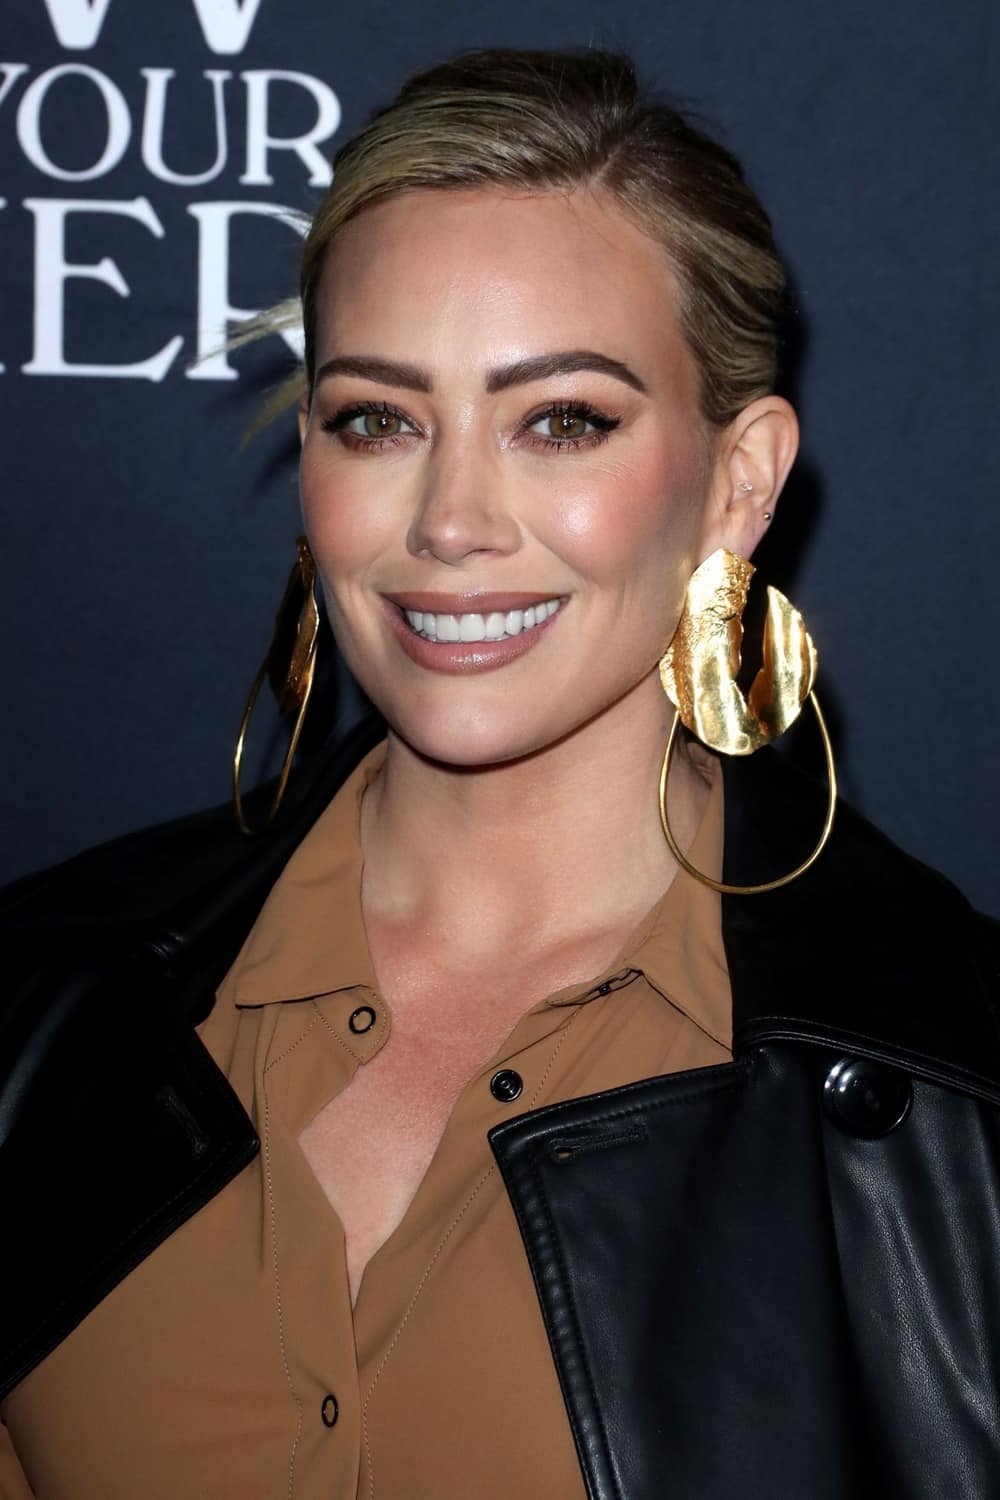 Hilary Duff Looked Mesmerizing at the "How I Met Your Father" Fans Event